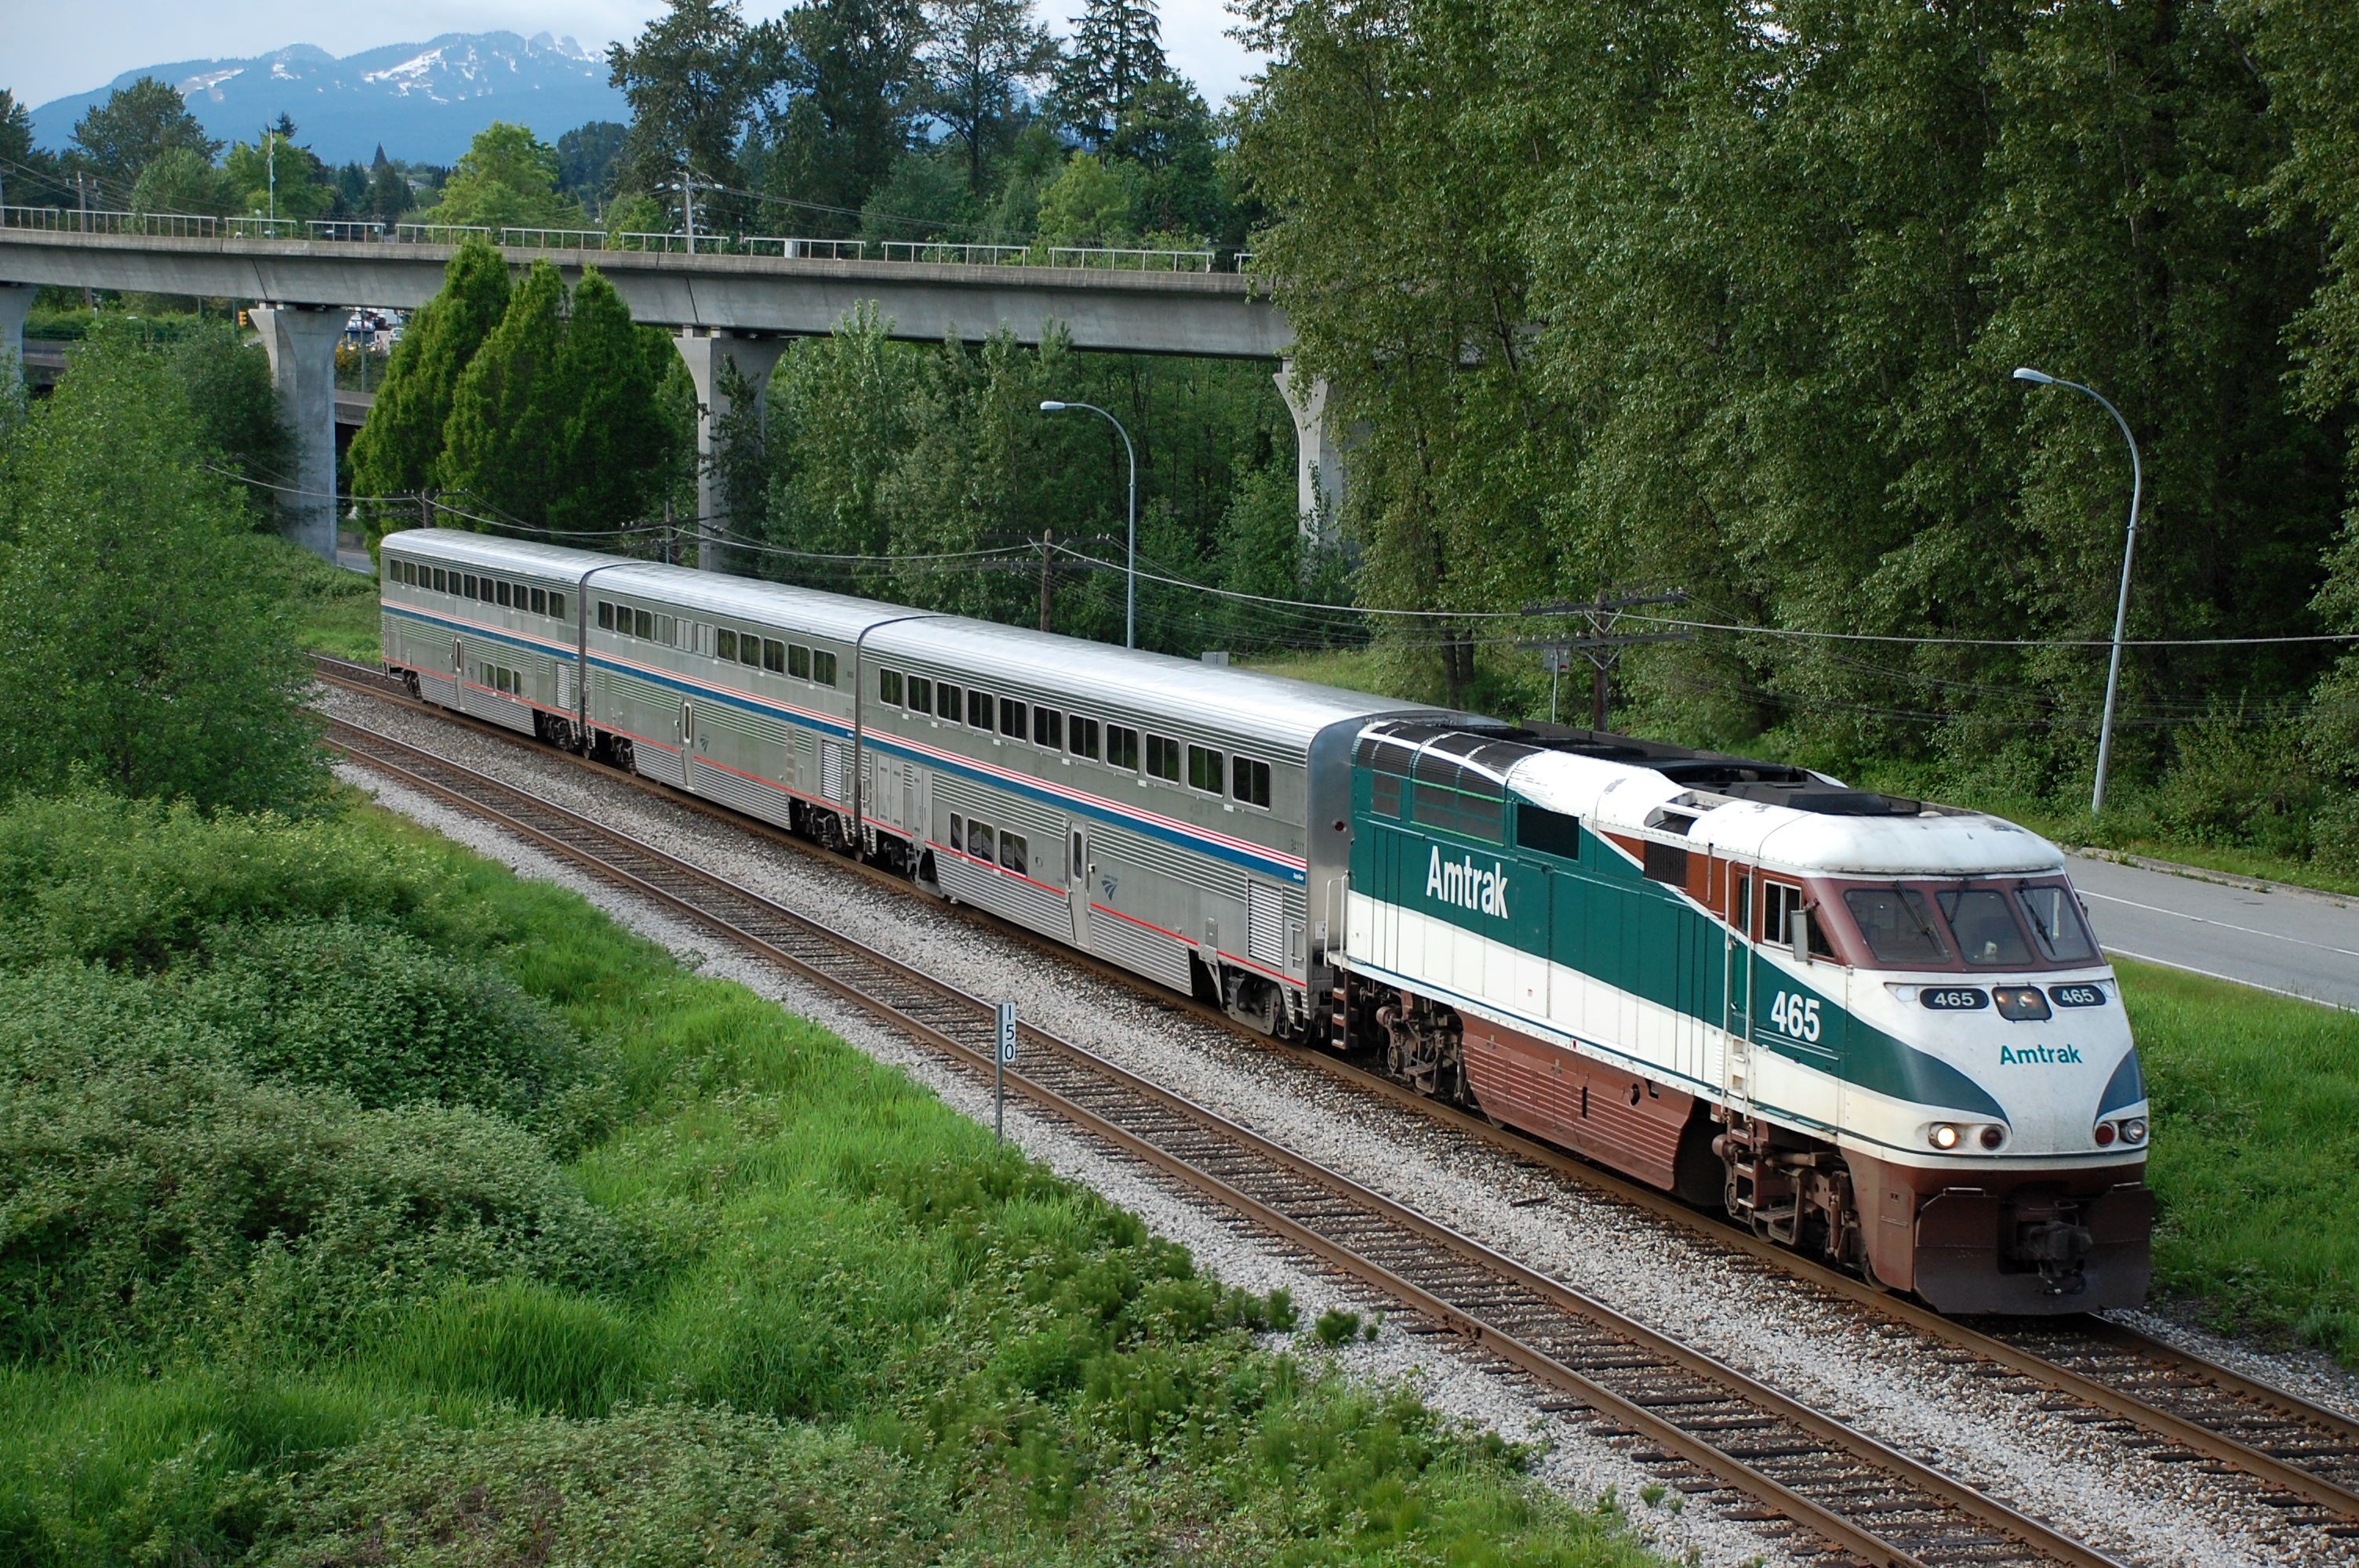 Comment on The 5:45pm Vancouver-Seattle Amtrak Cascades is passing Burnaby ...